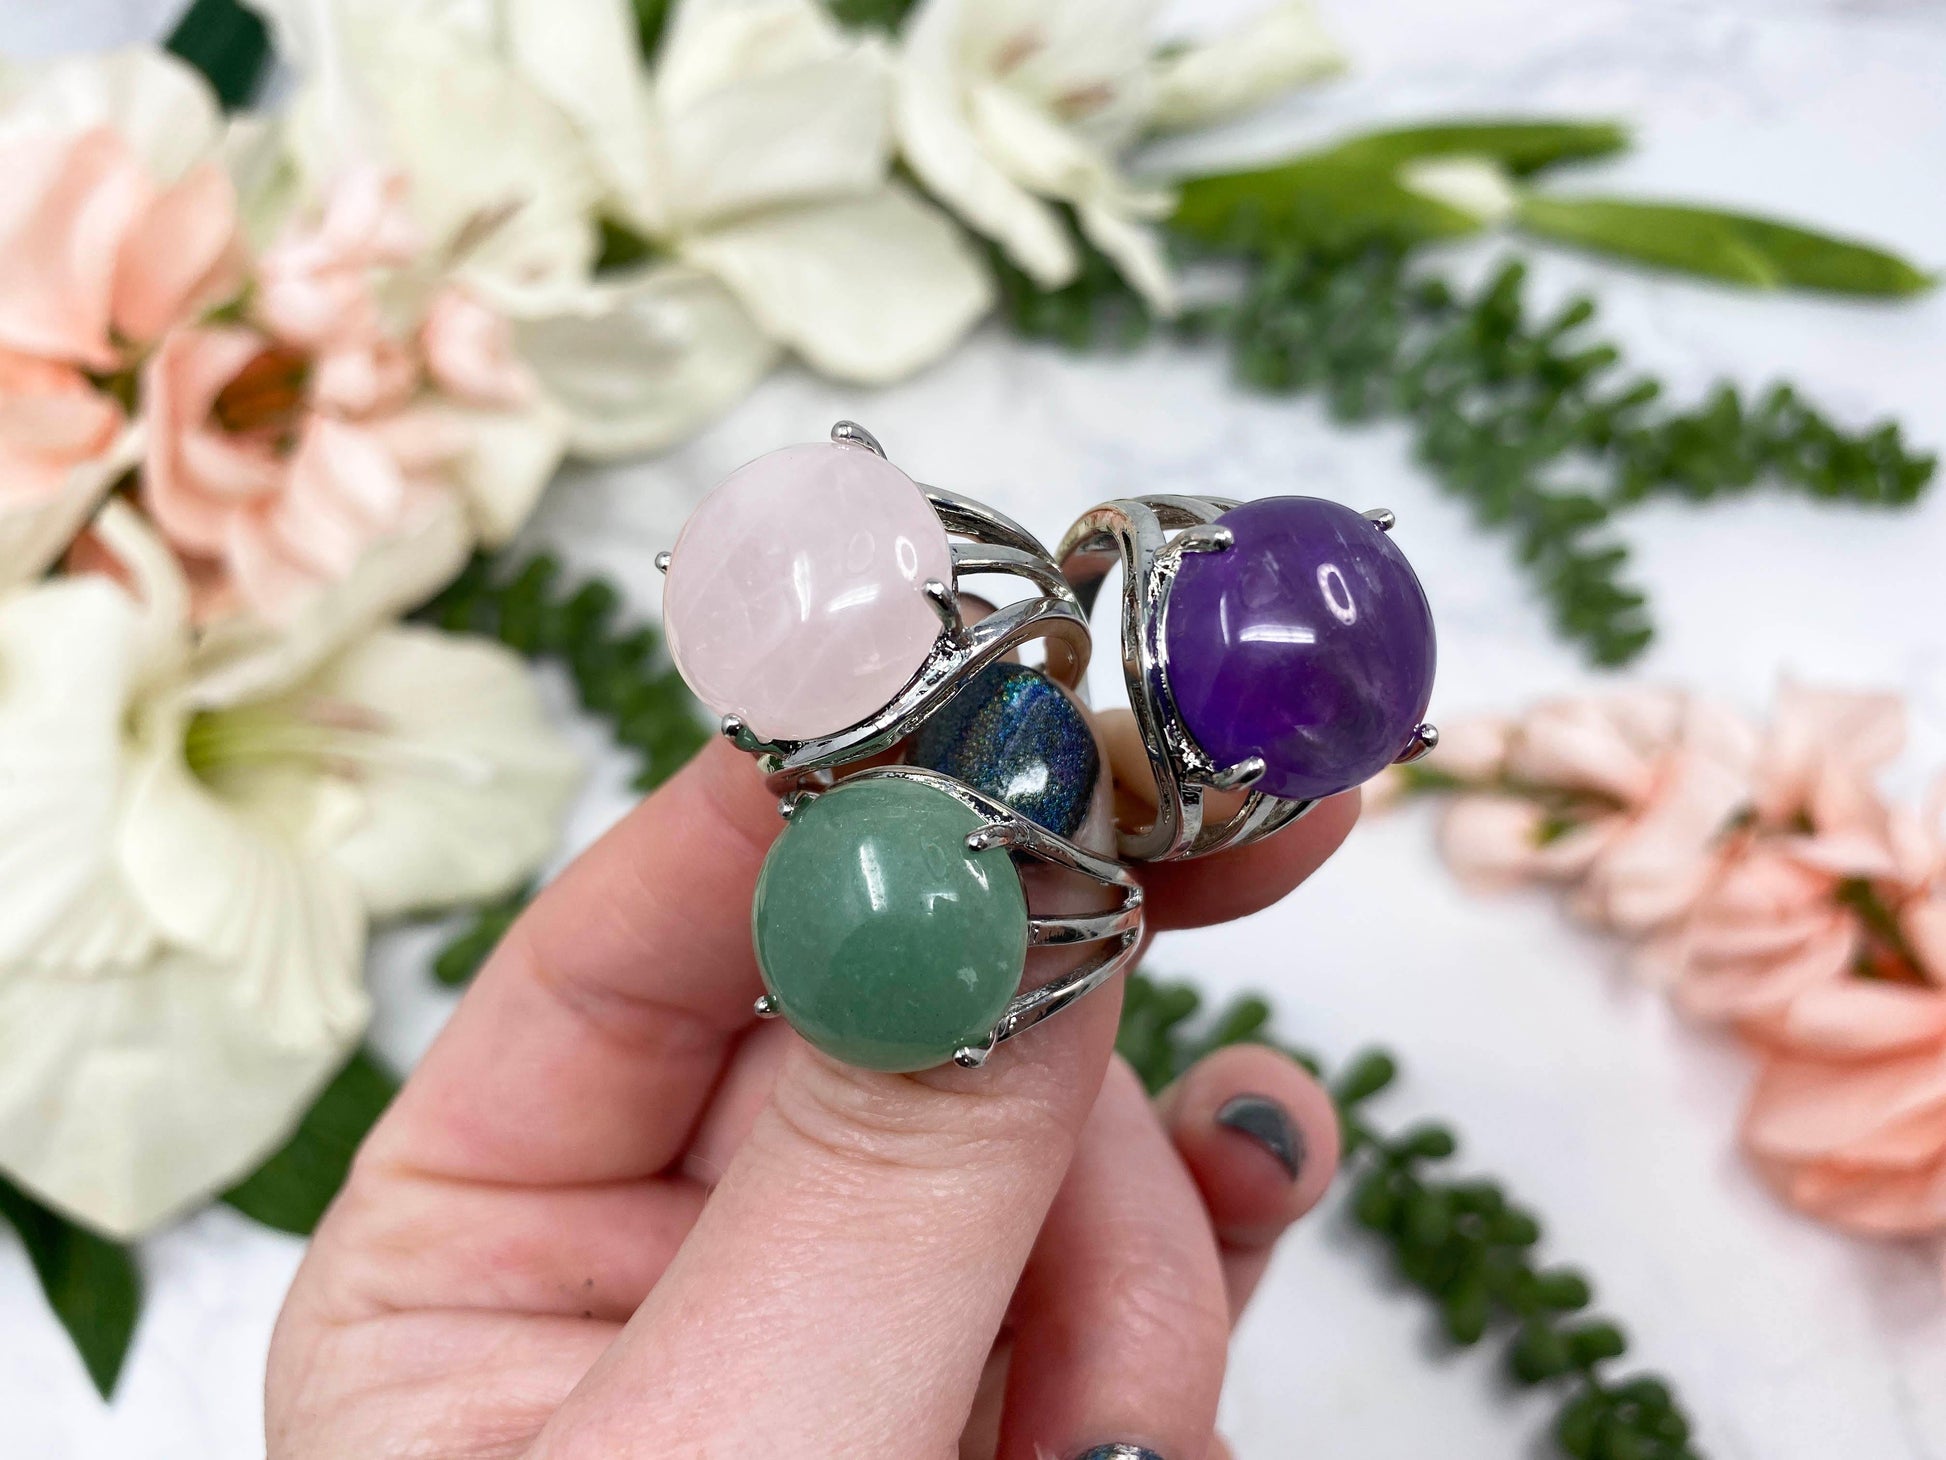 Adjustable Gemstone Rings Just for Fun! Available in Amethyst, Green Aventurine, Rose Quartz, Obsidian, and Clear Quartz